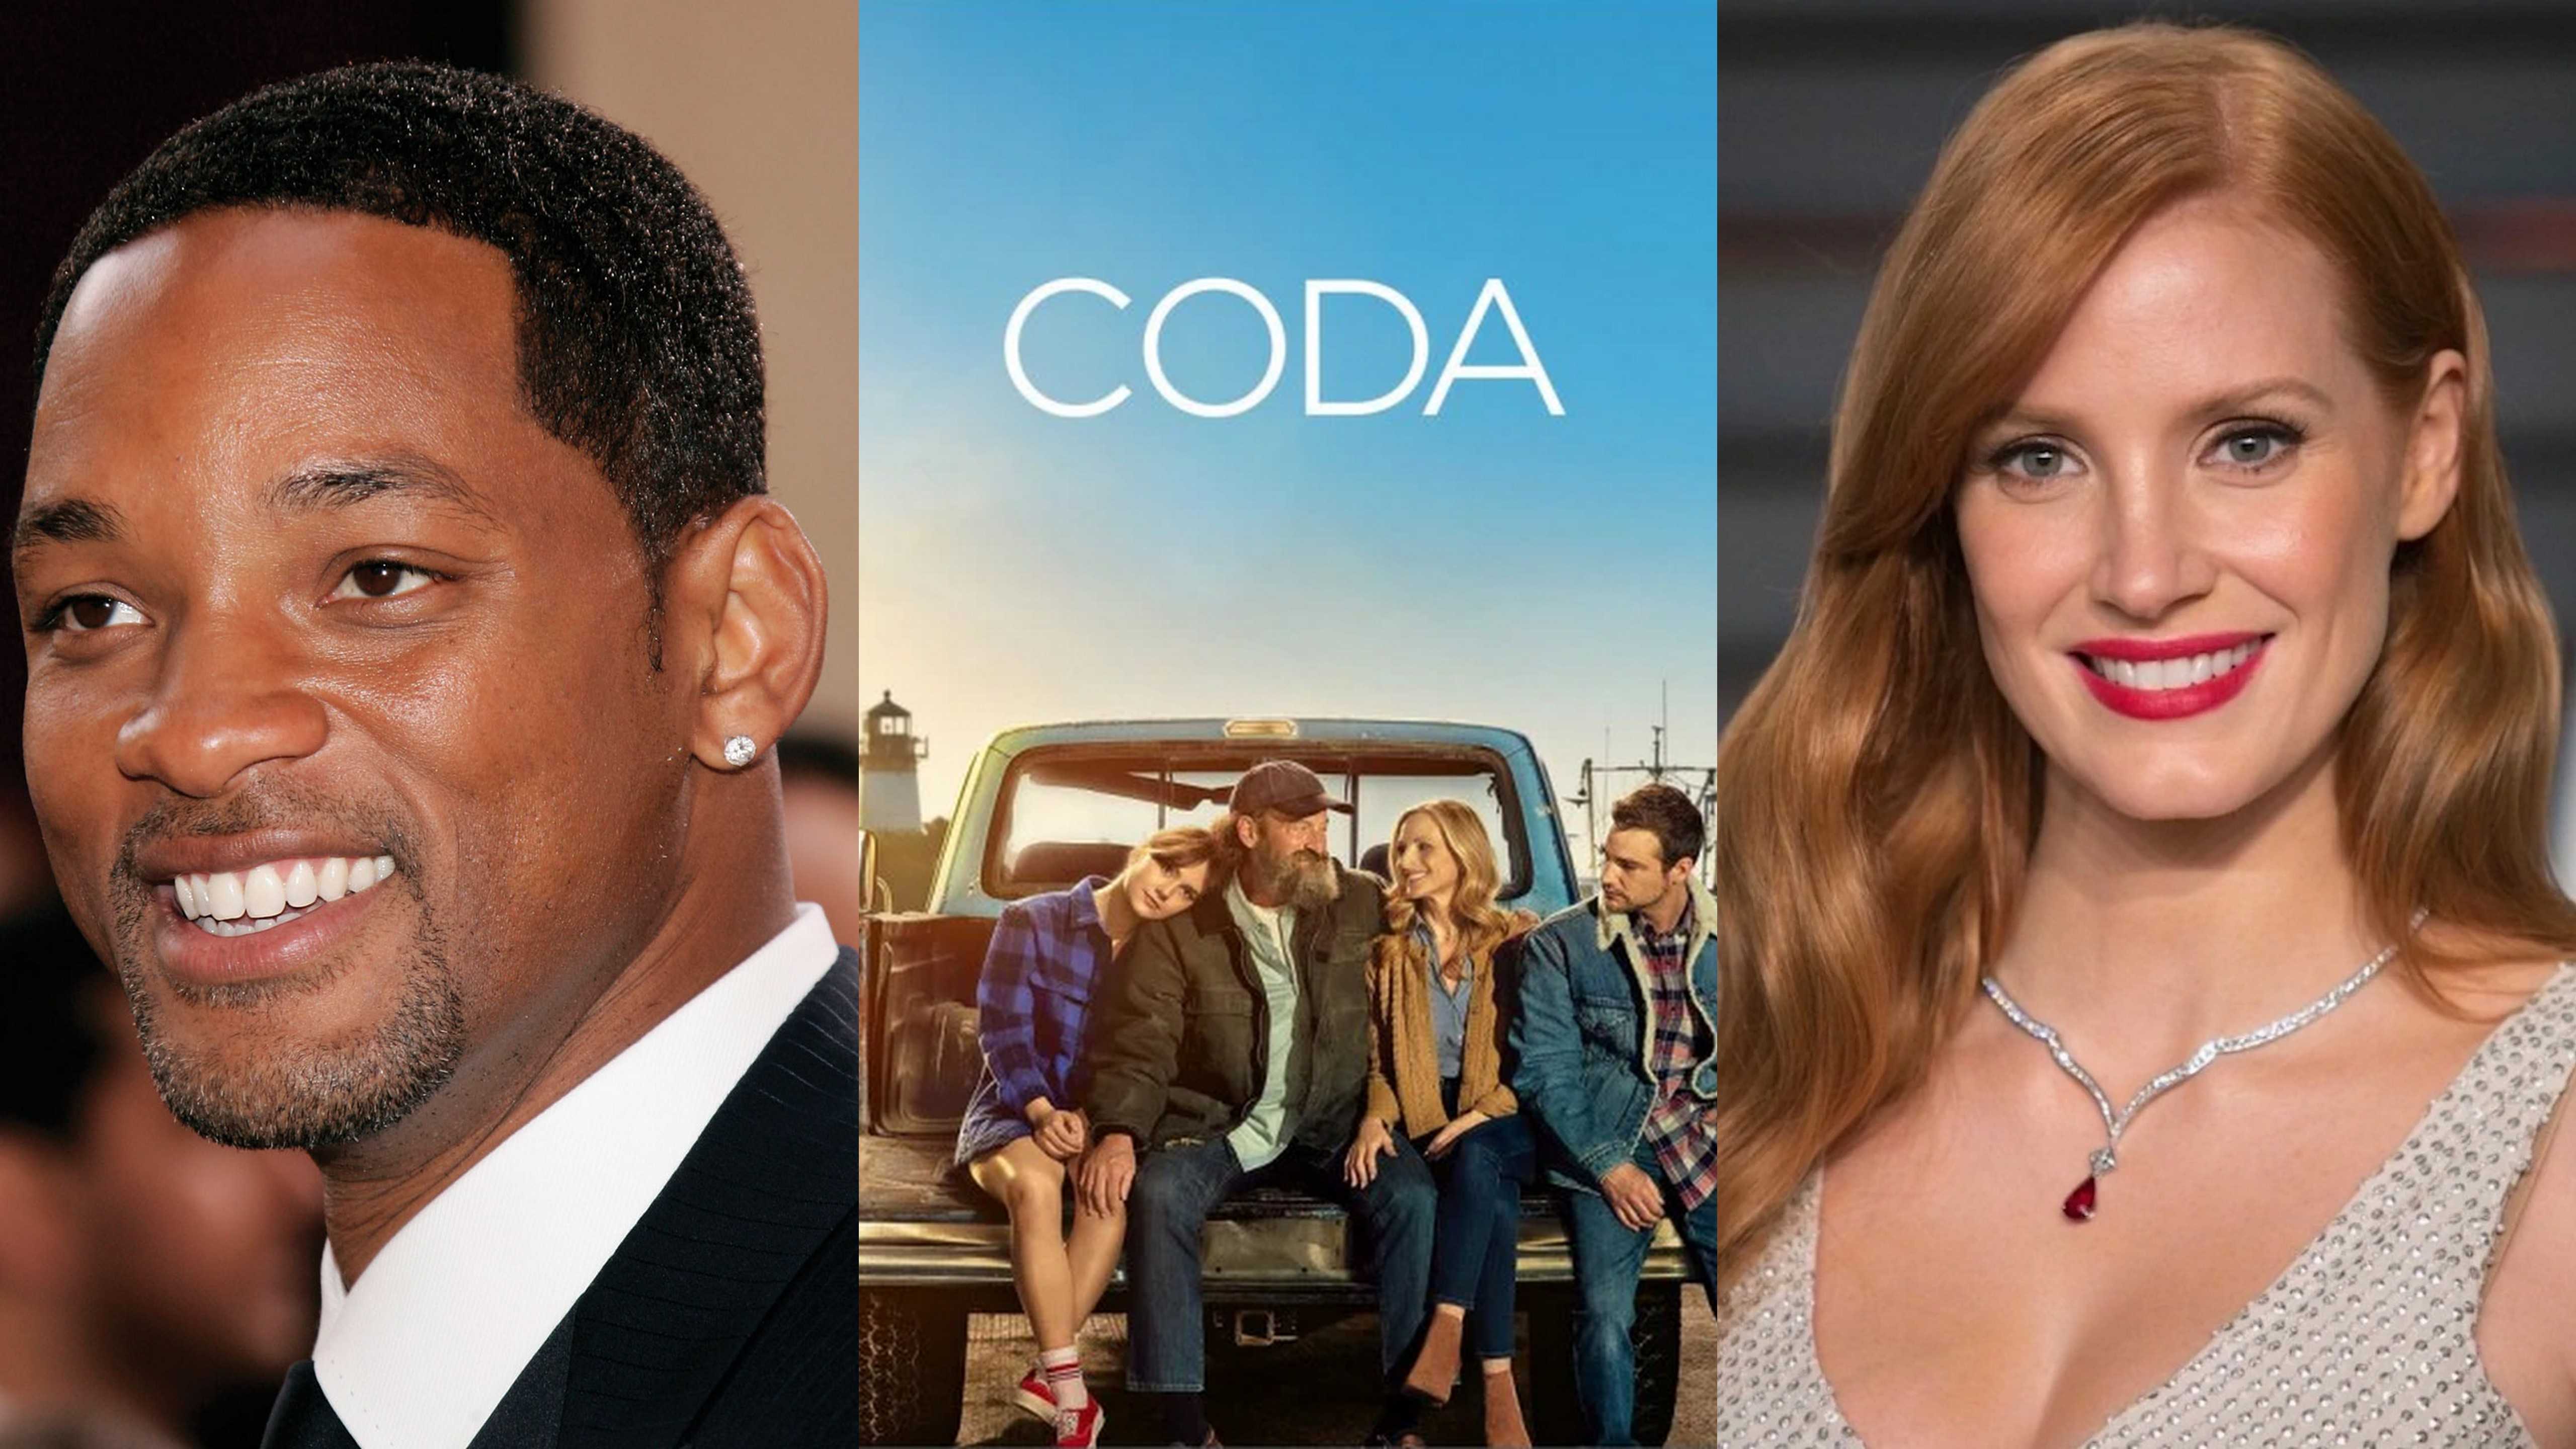 Oscars 2022 - Will Smith and Jessica Chastain take home best actor awards and CODA wins best picture